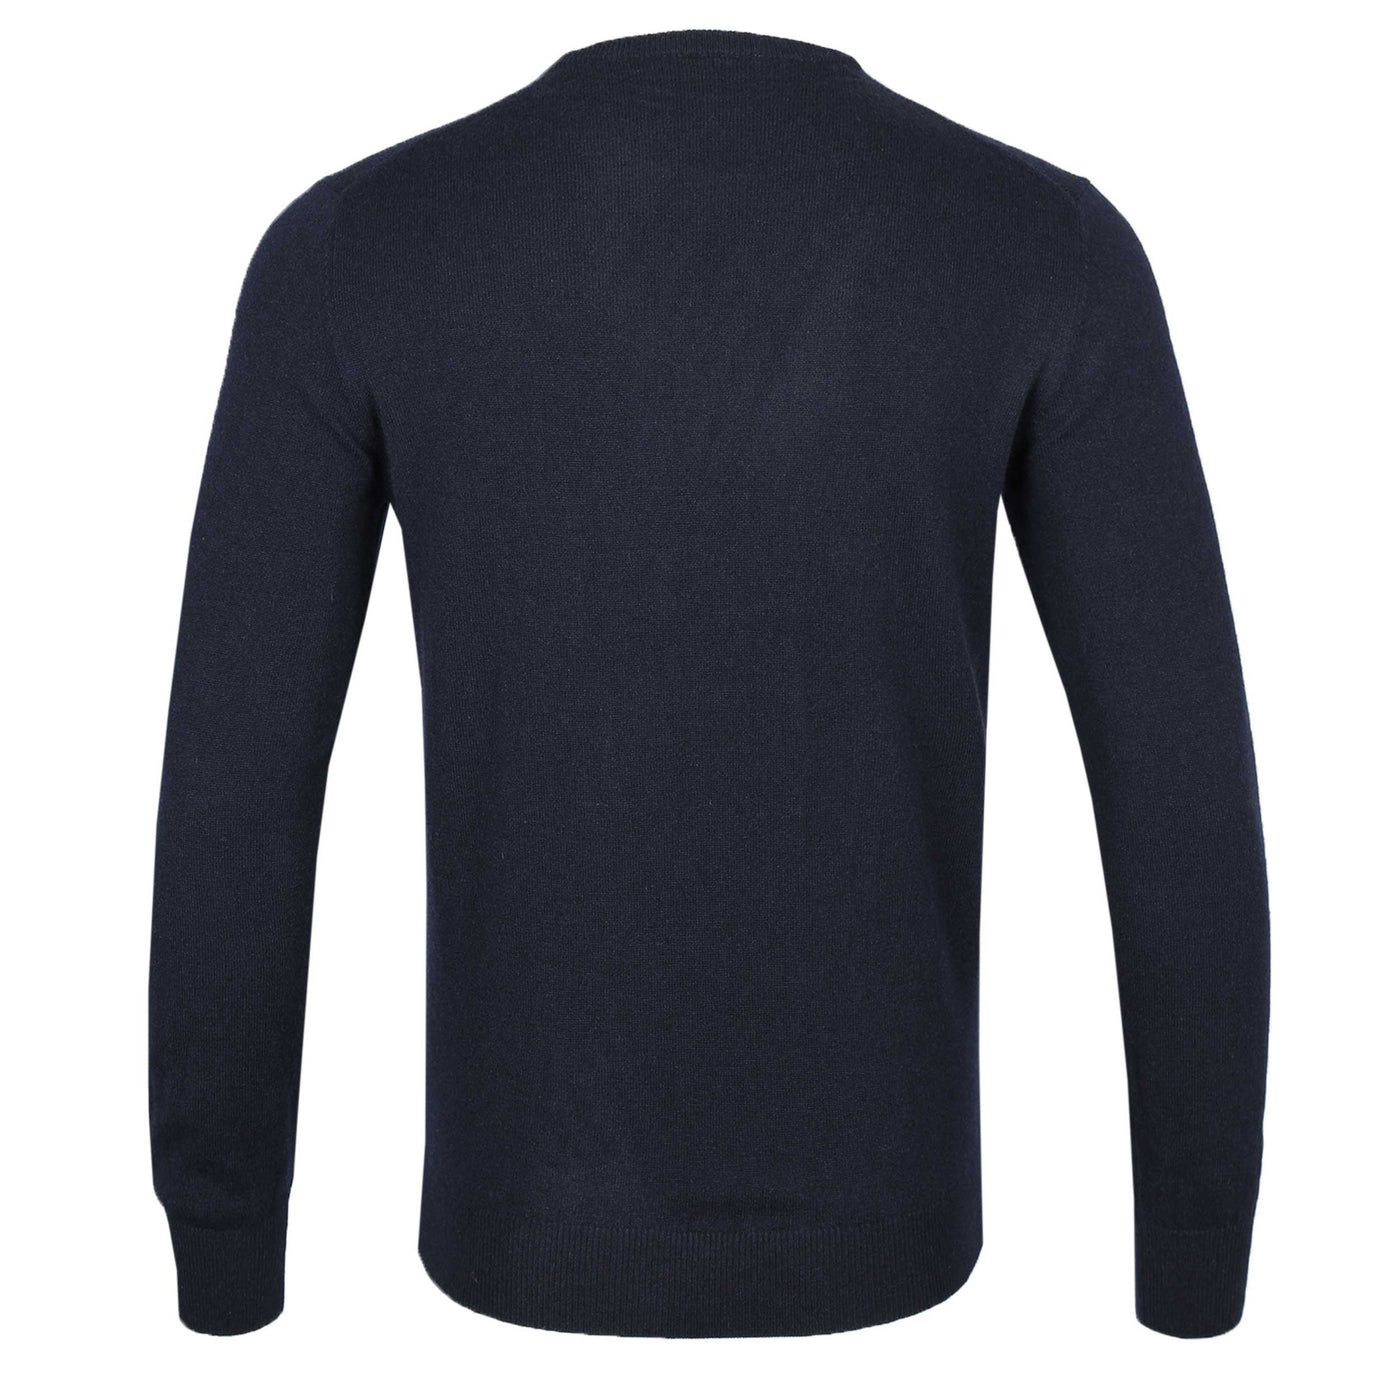 Thomas Maine Crew Neck Cashmere Knitwear in Black Back